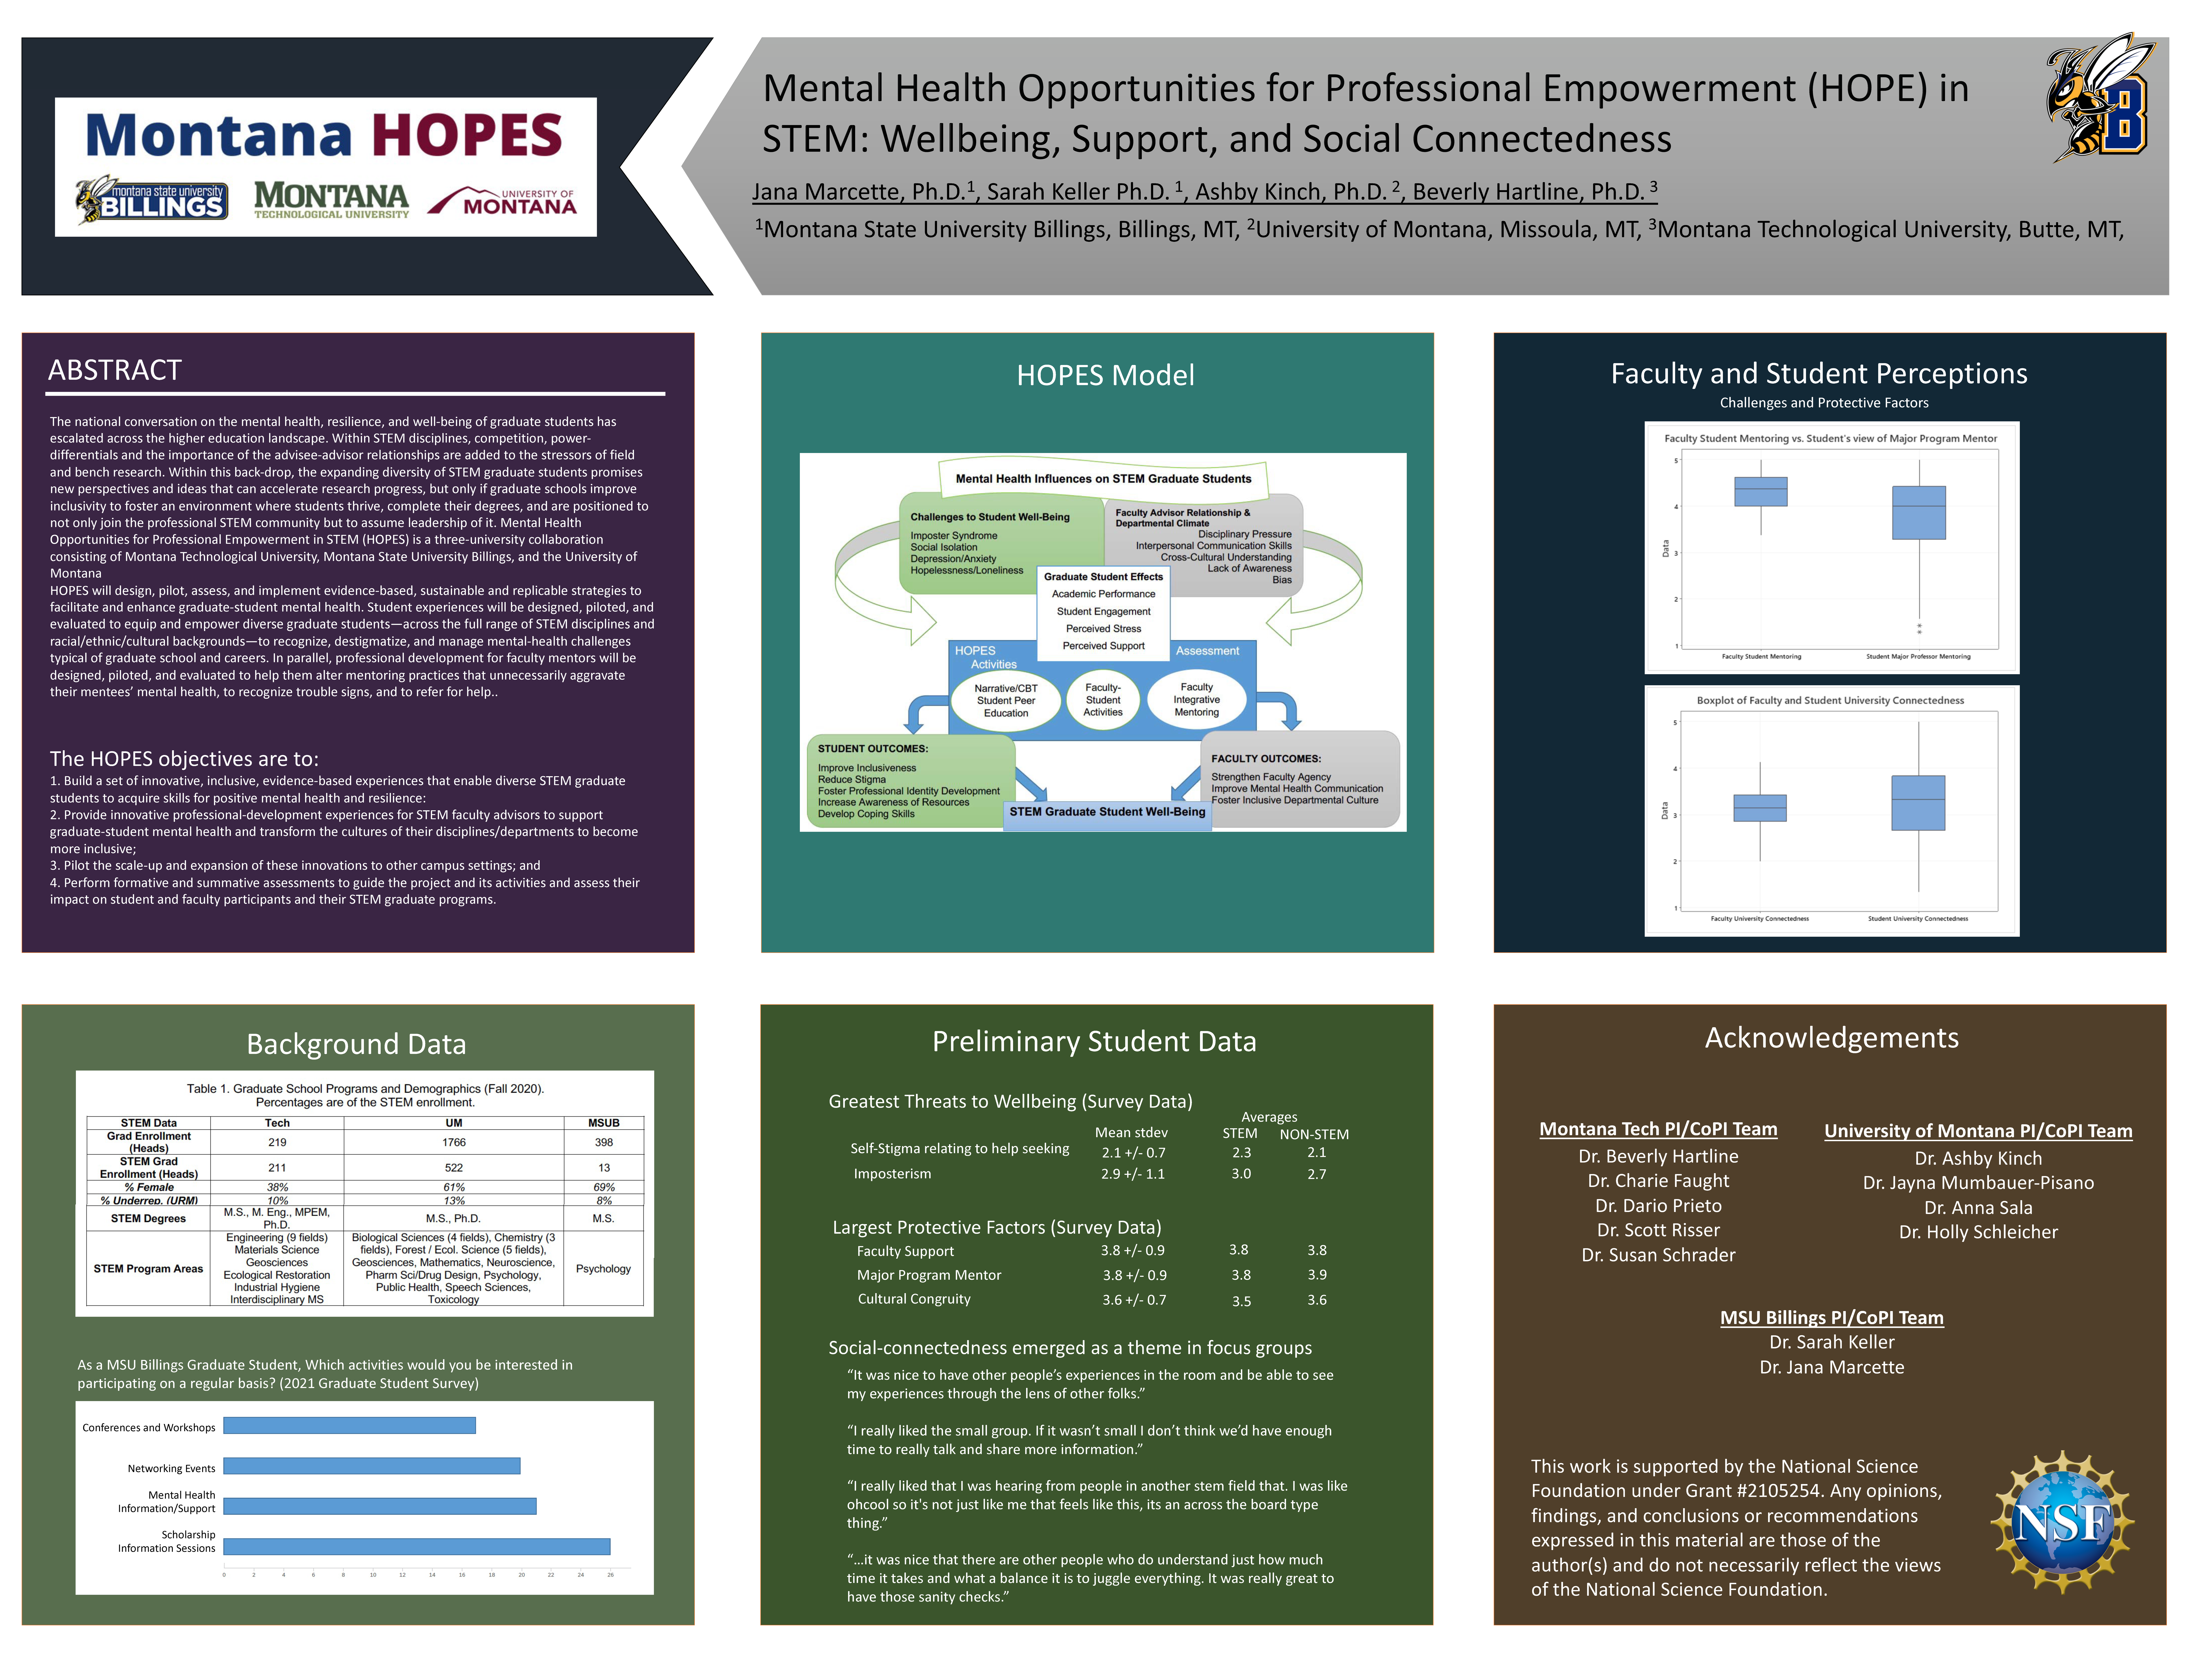 Mental Health Opportunities for Professional Empowerment (HOPE) in STEM: Wellbeing, Support, and Social Connectedness